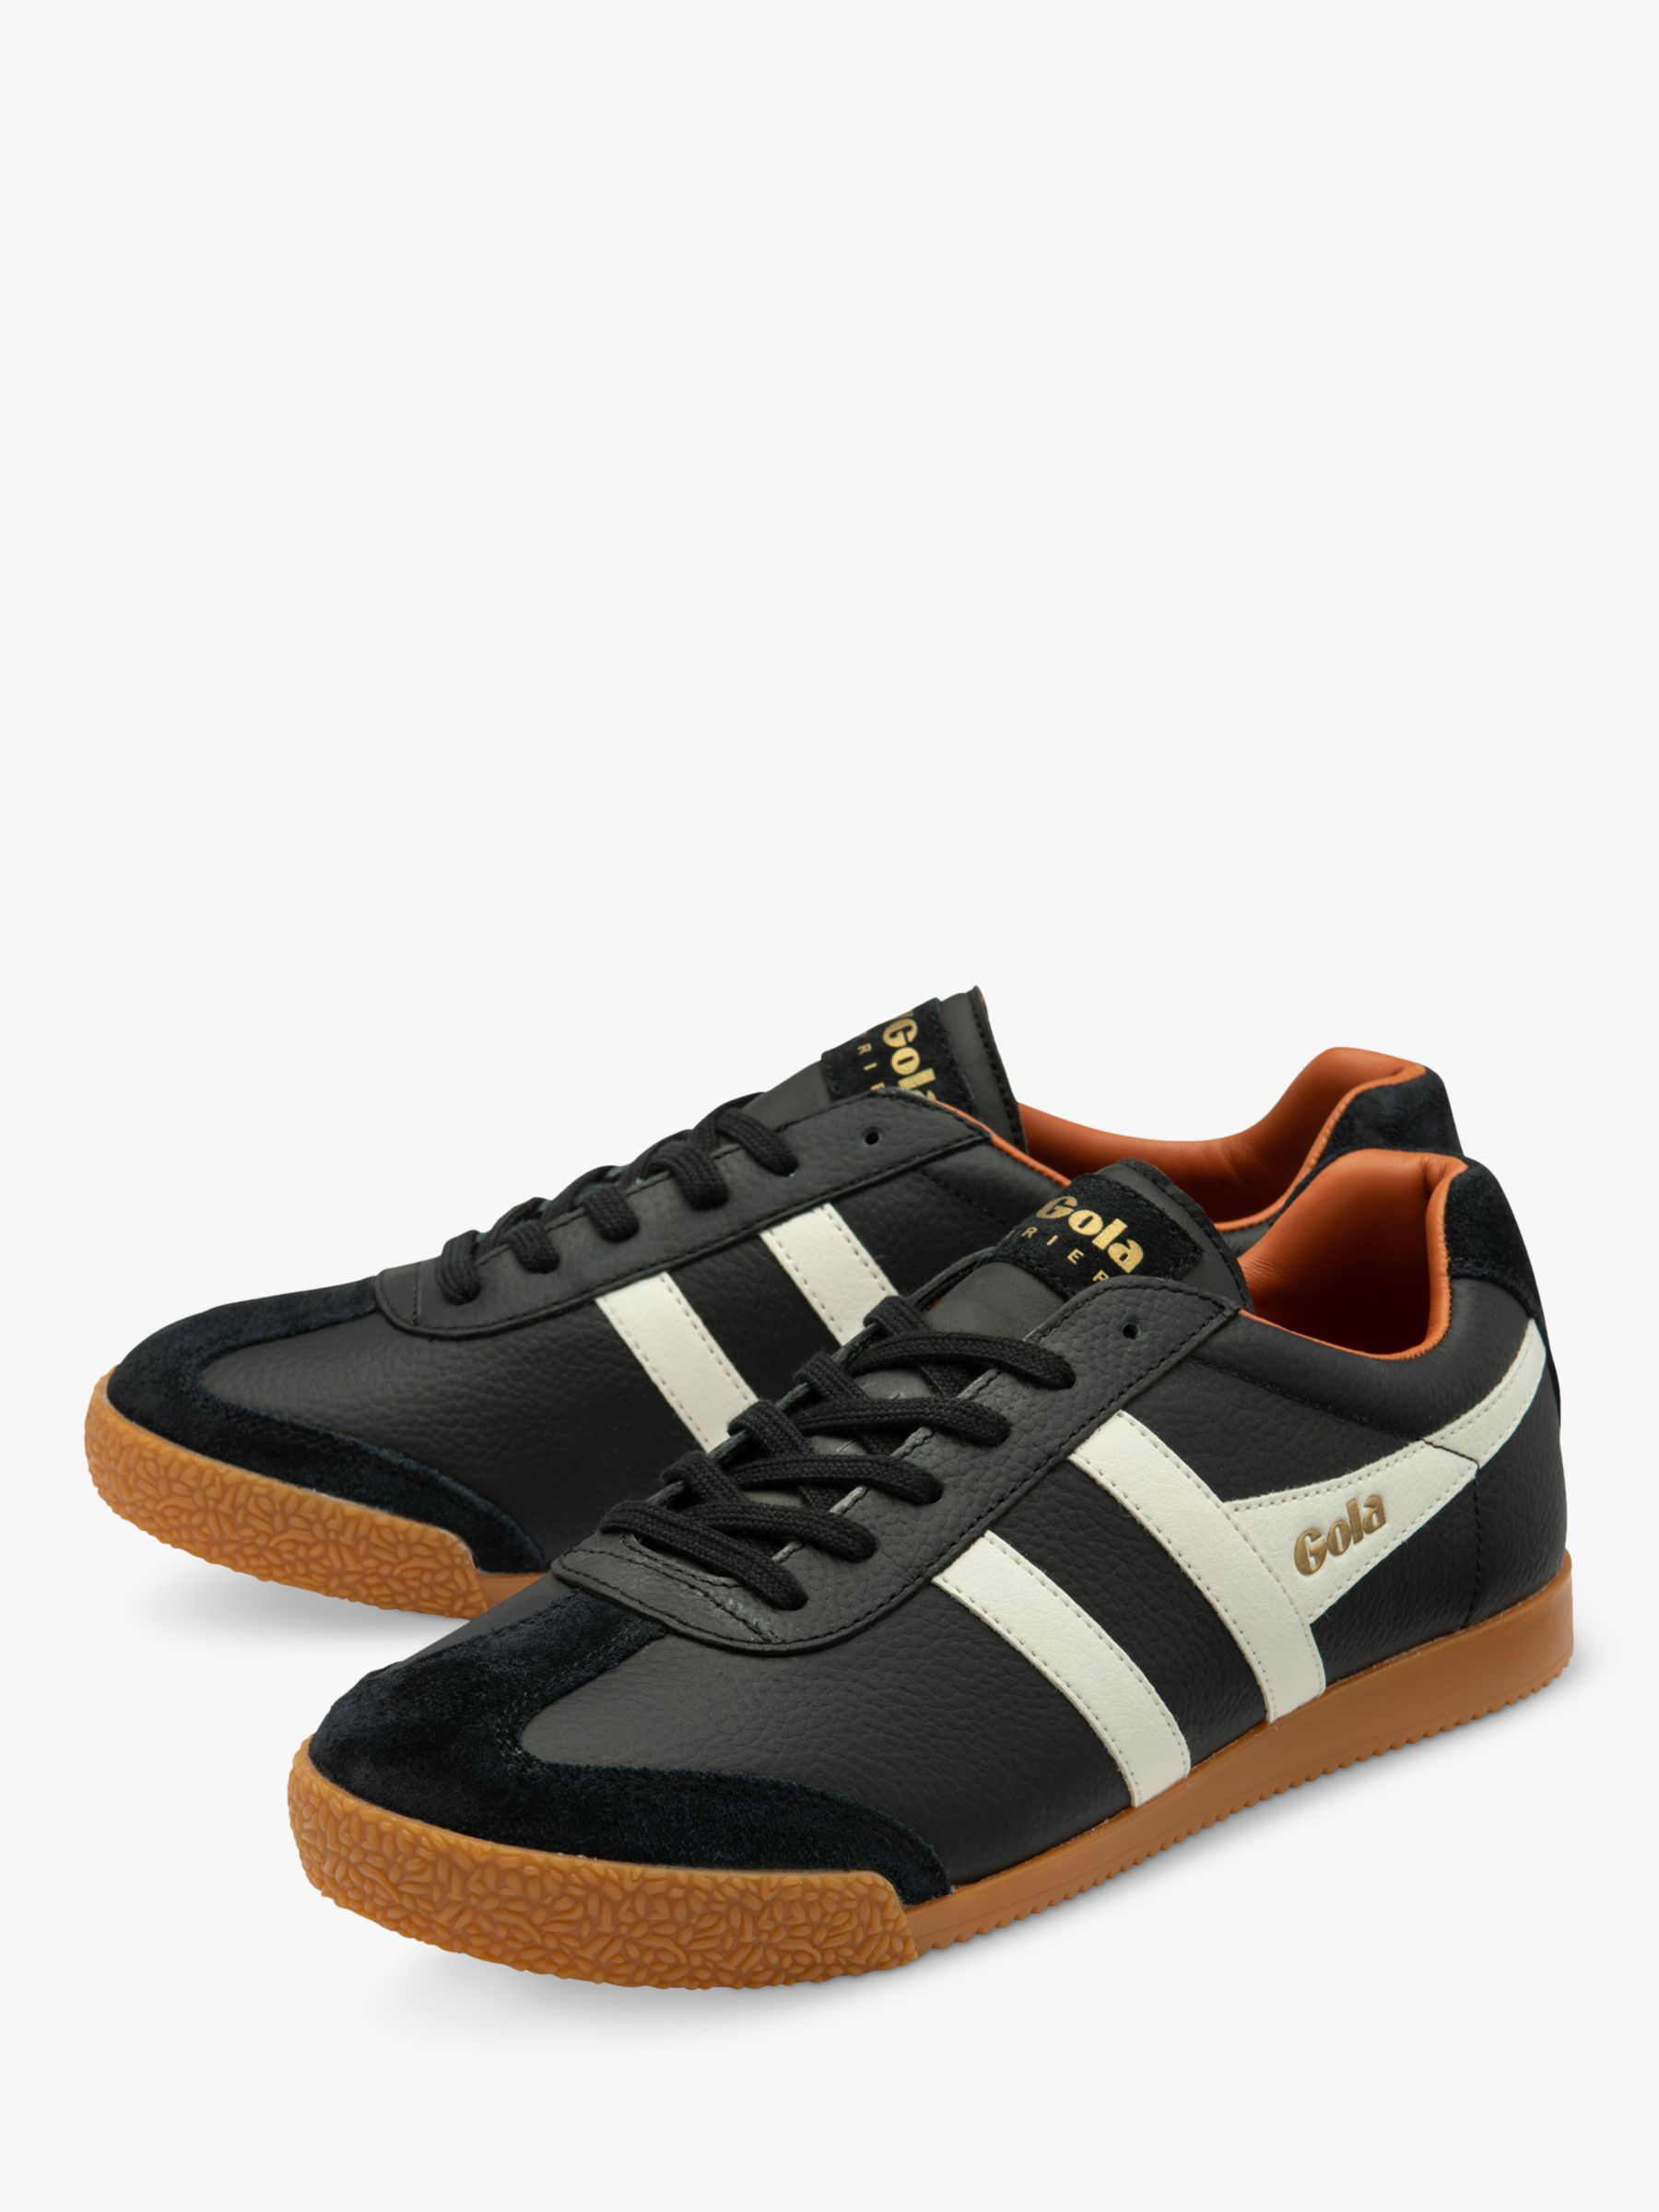 Buy Gola Classics Harrier Leather Lace Up Trainers, Black/White/Orange Online at johnlewis.com